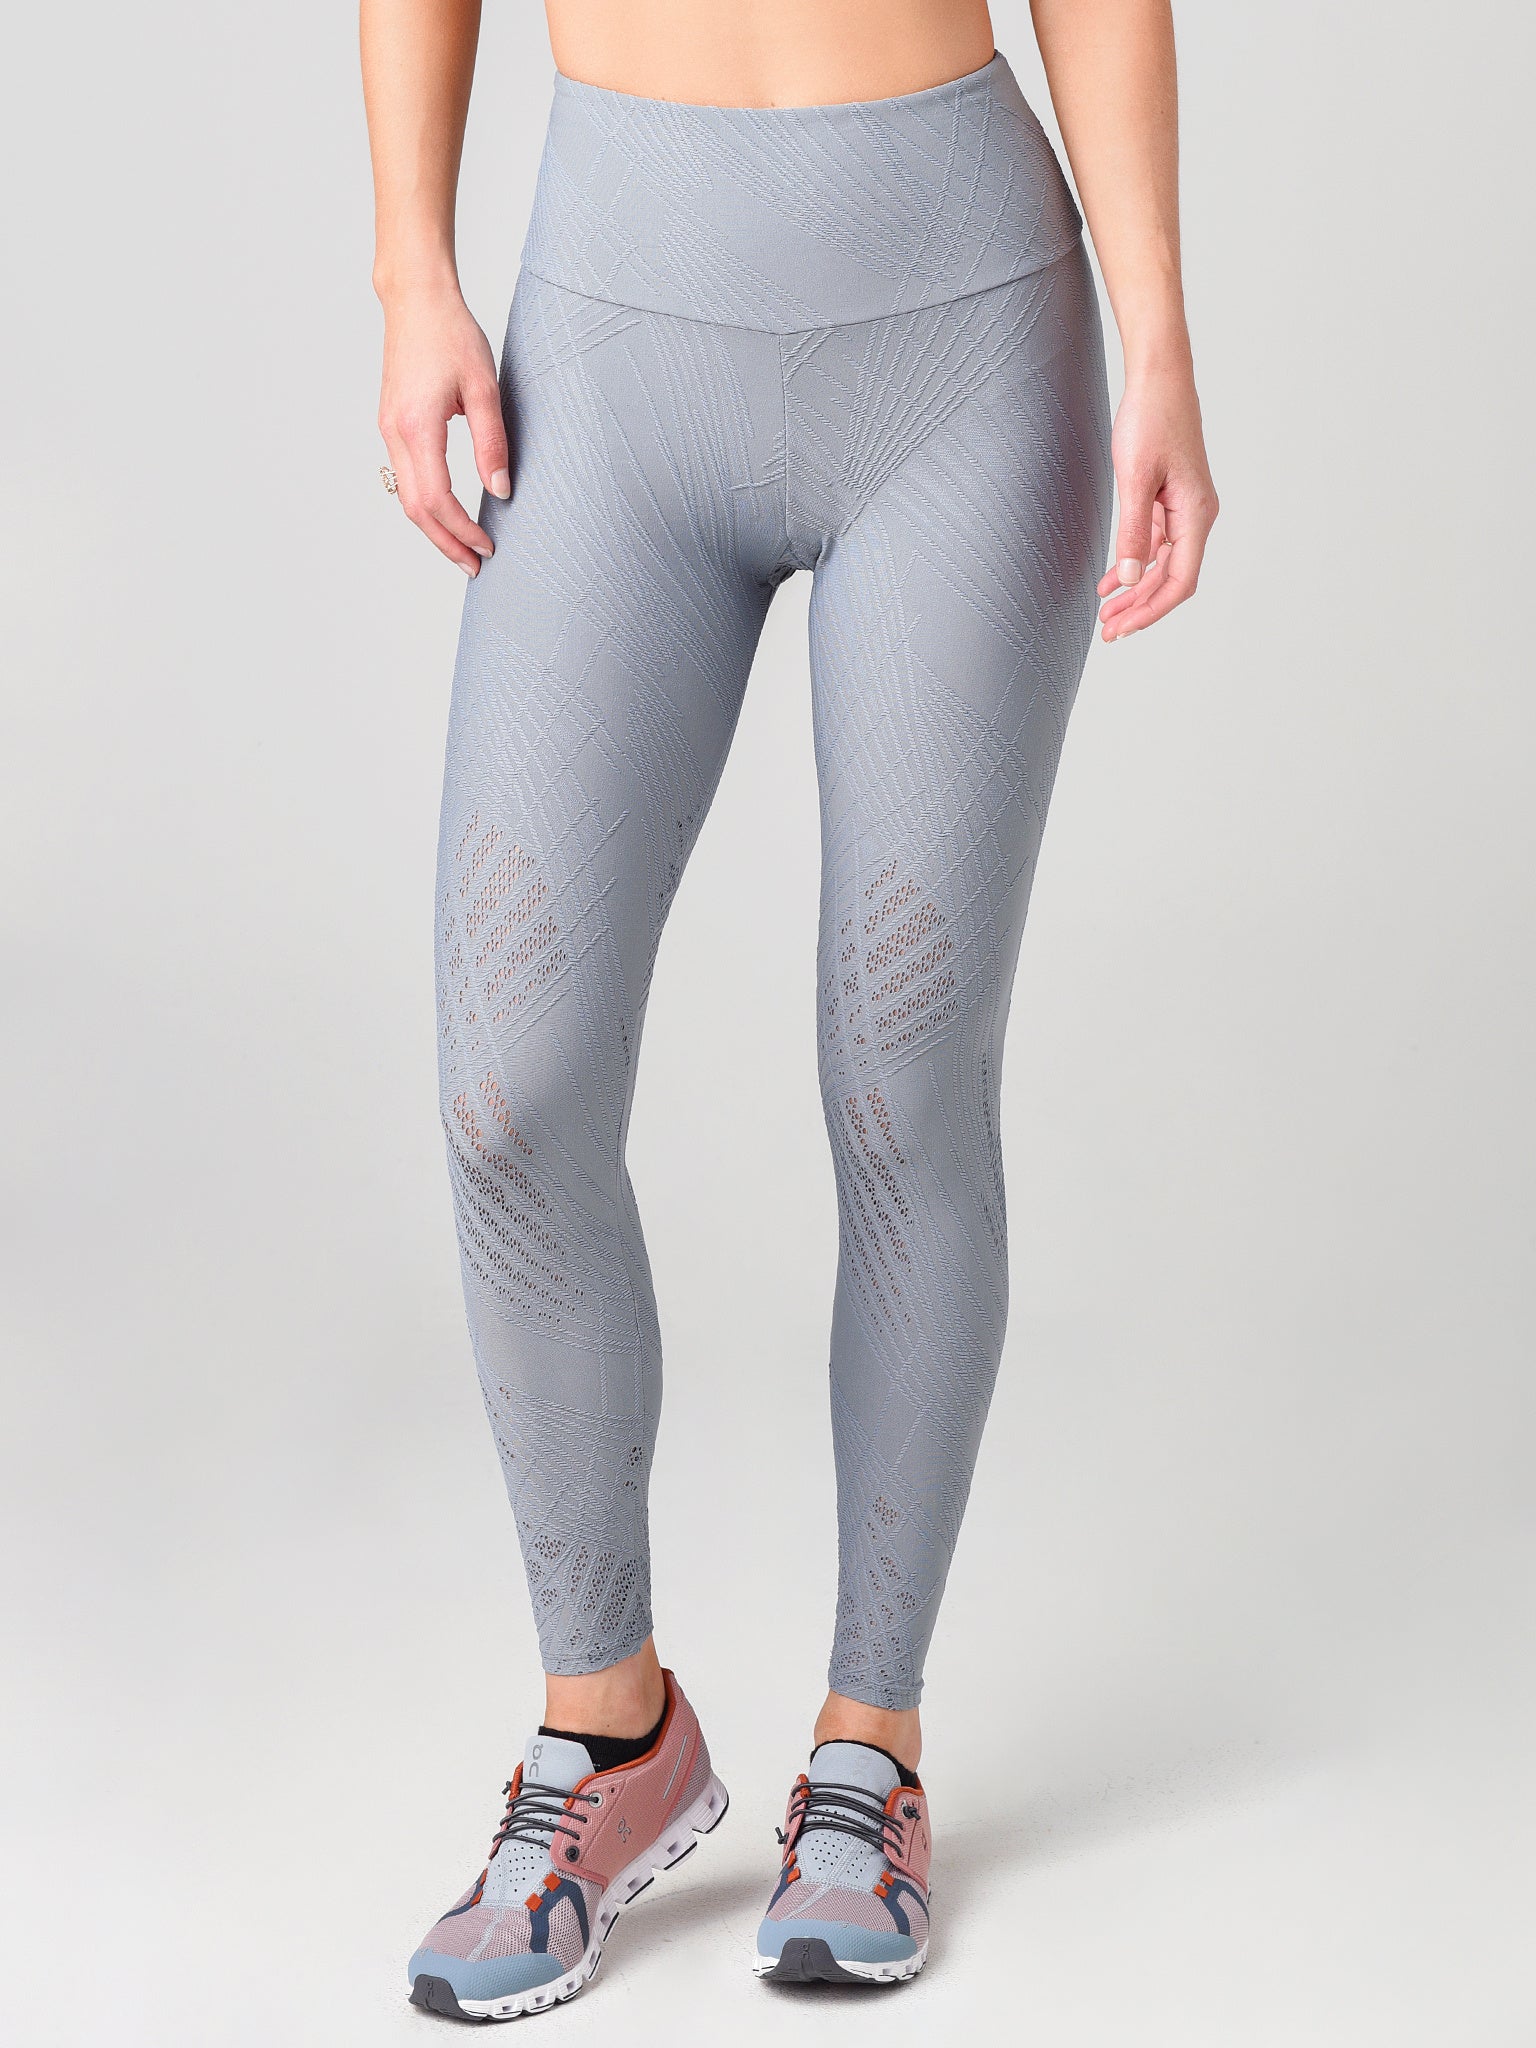 Yoga Pants and Bottoms for Women – ONZIE